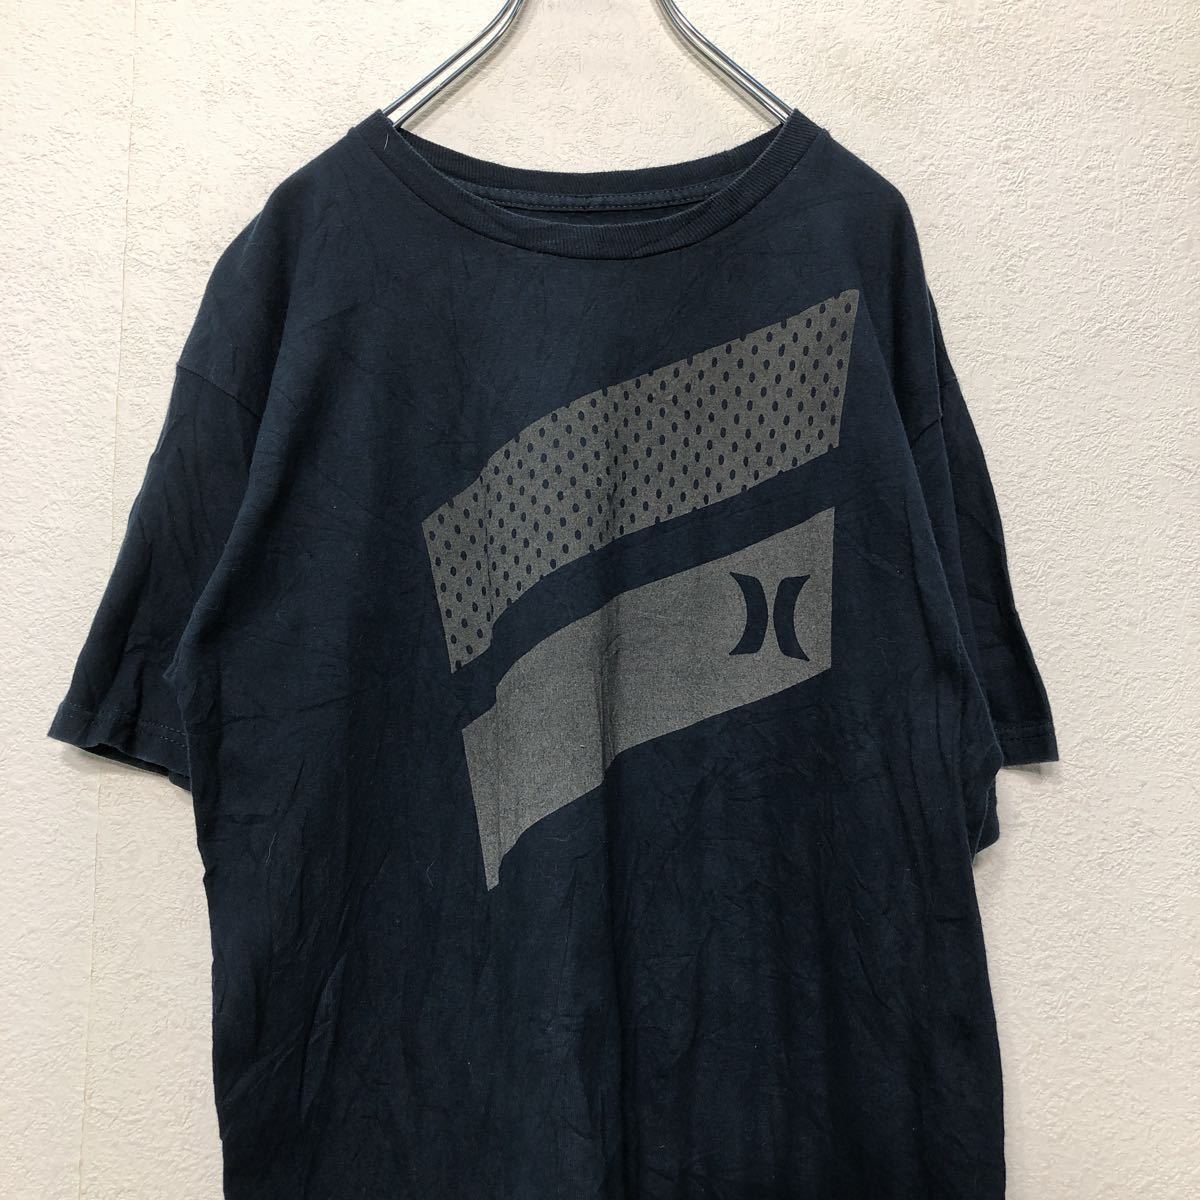 Hurley print T-shirt M size Harley sport Logo navy blue navy old clothes . America stock a408-5068